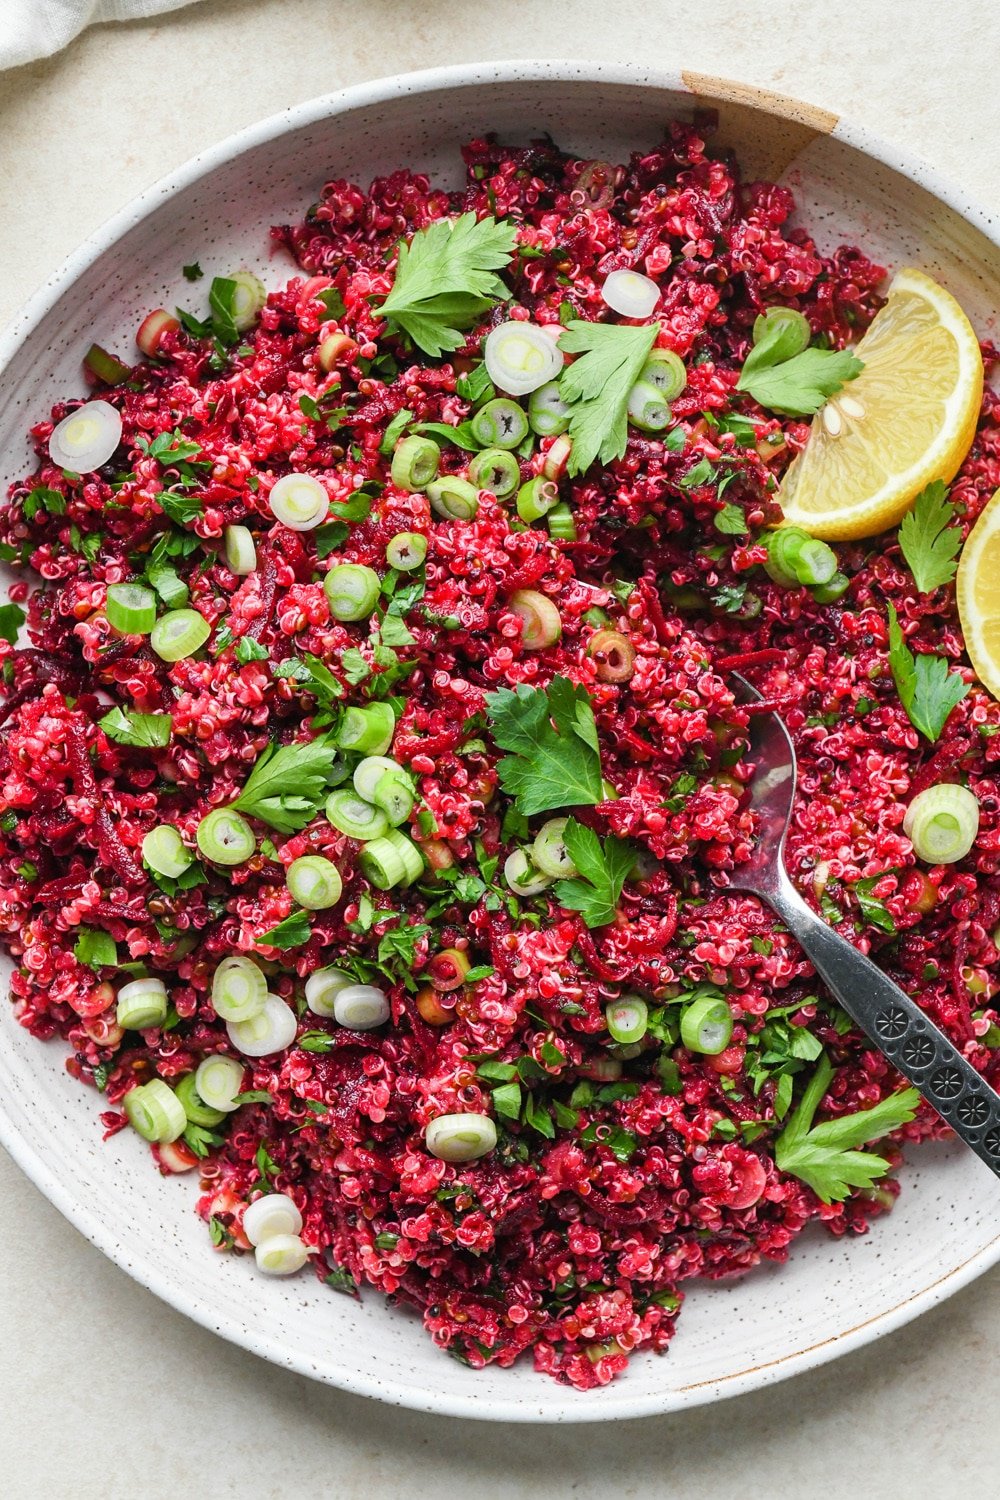 Quinoa and beet salad in a large shallow ceramic serving dish. The salad is garnished with sliced green onion, fresh chopped parsley, and lemon wedges on the side.